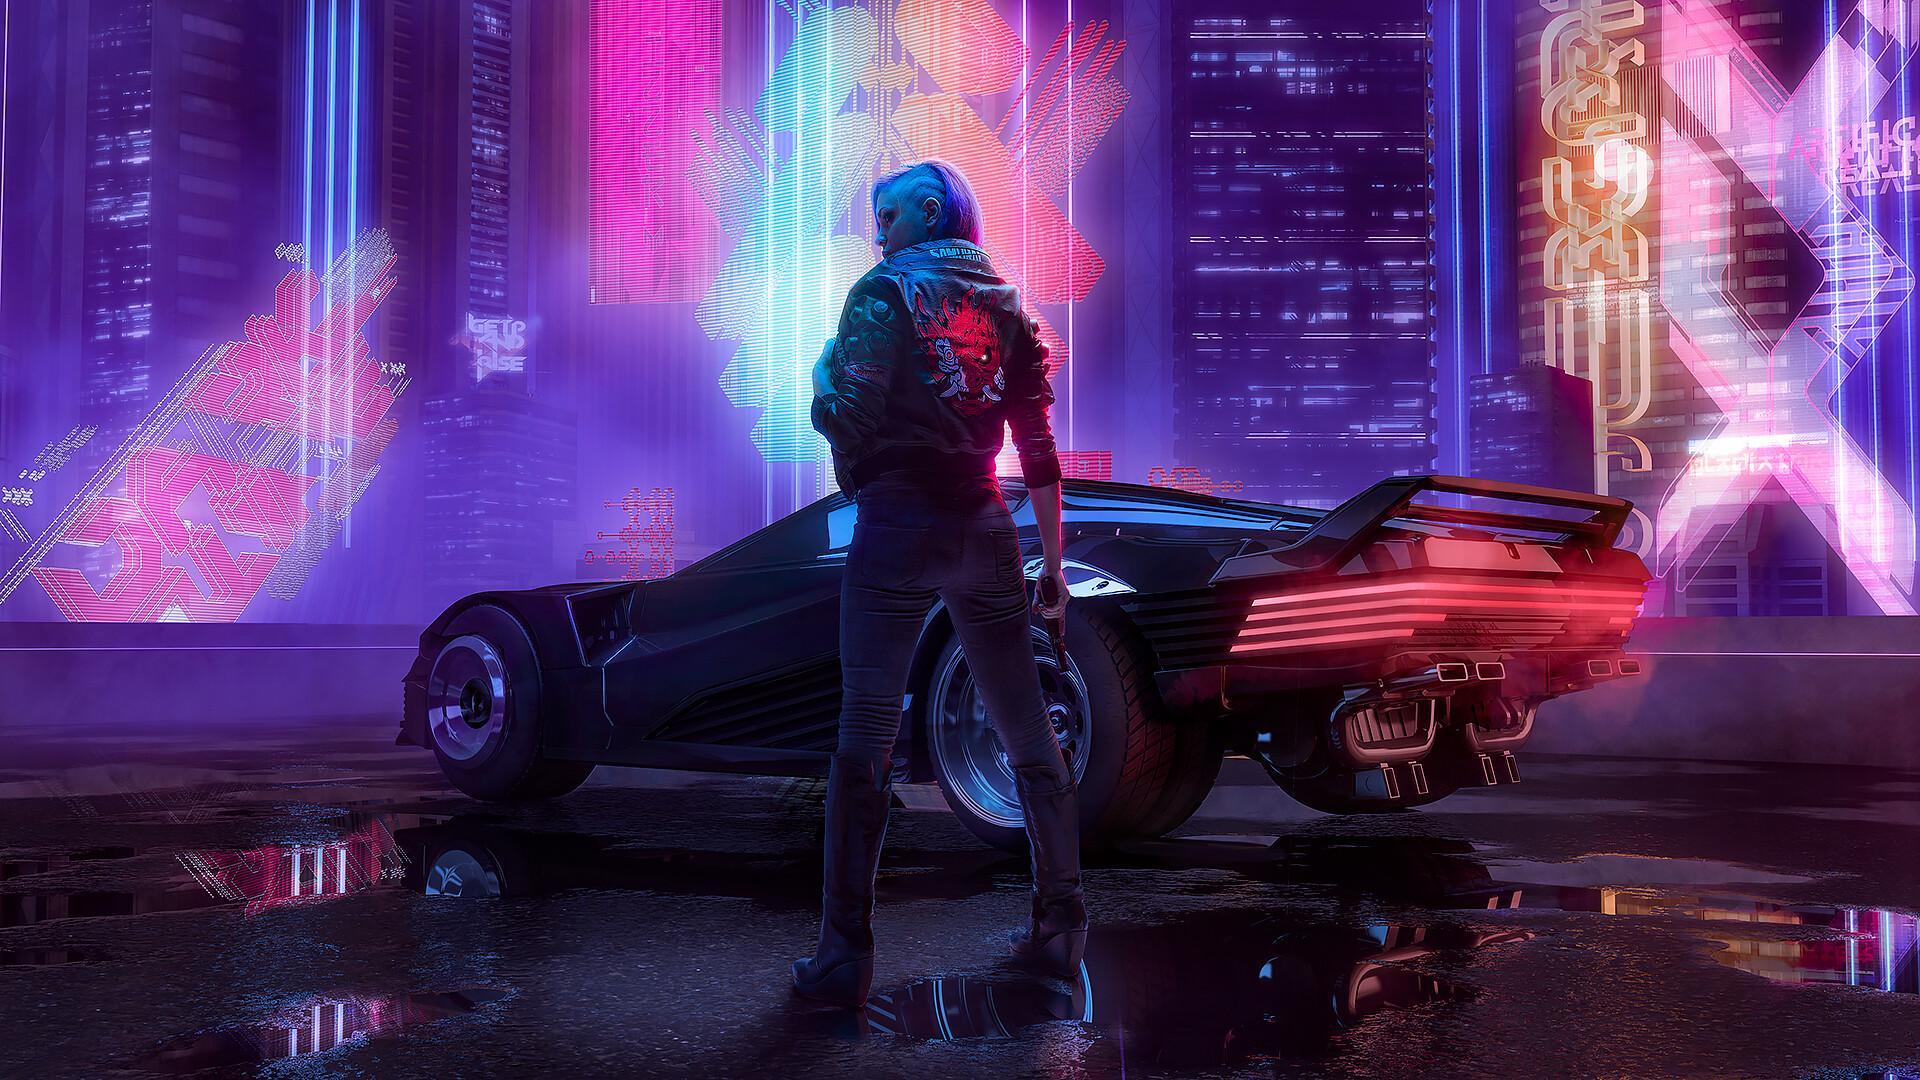 A woman in a leather jacket stands in front of a car with neon lights - Cyberpunk